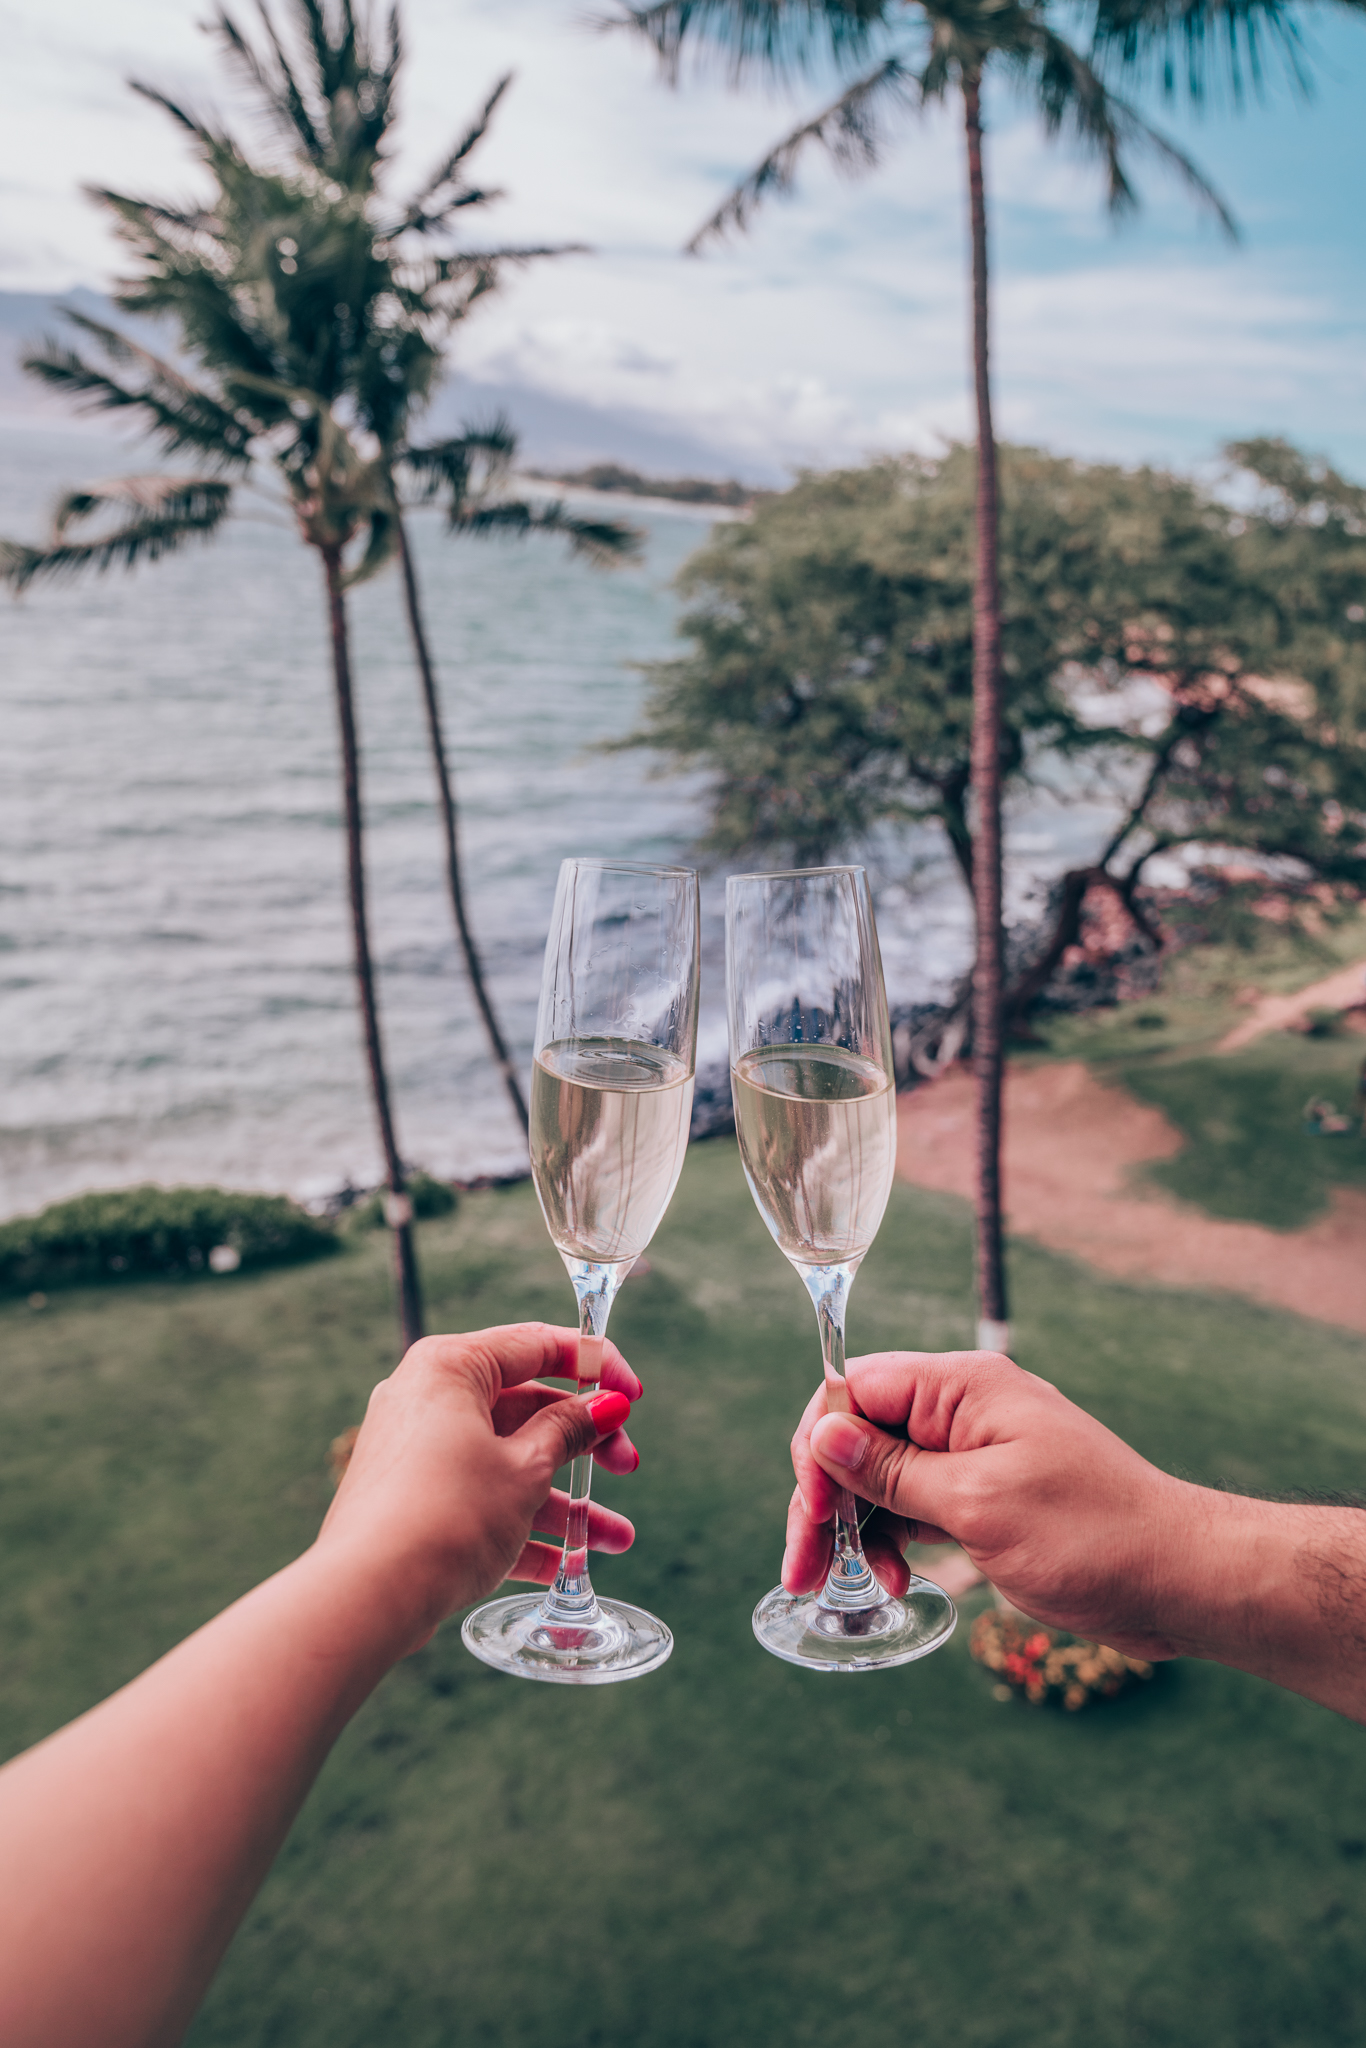 Cheers to an Incredible View at Maui Beachside